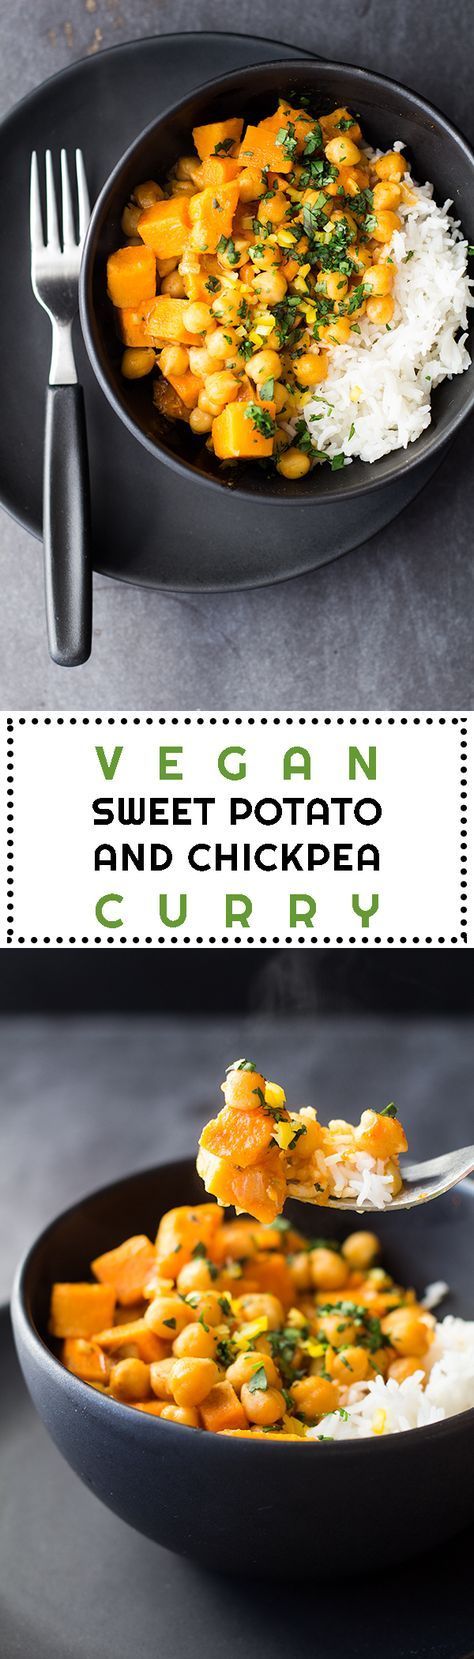 A quick and easy, soy-free, gluten-free, Thai Vegan Sweet Potato and Chickpea Curry for a meatless Monday full of flavor and